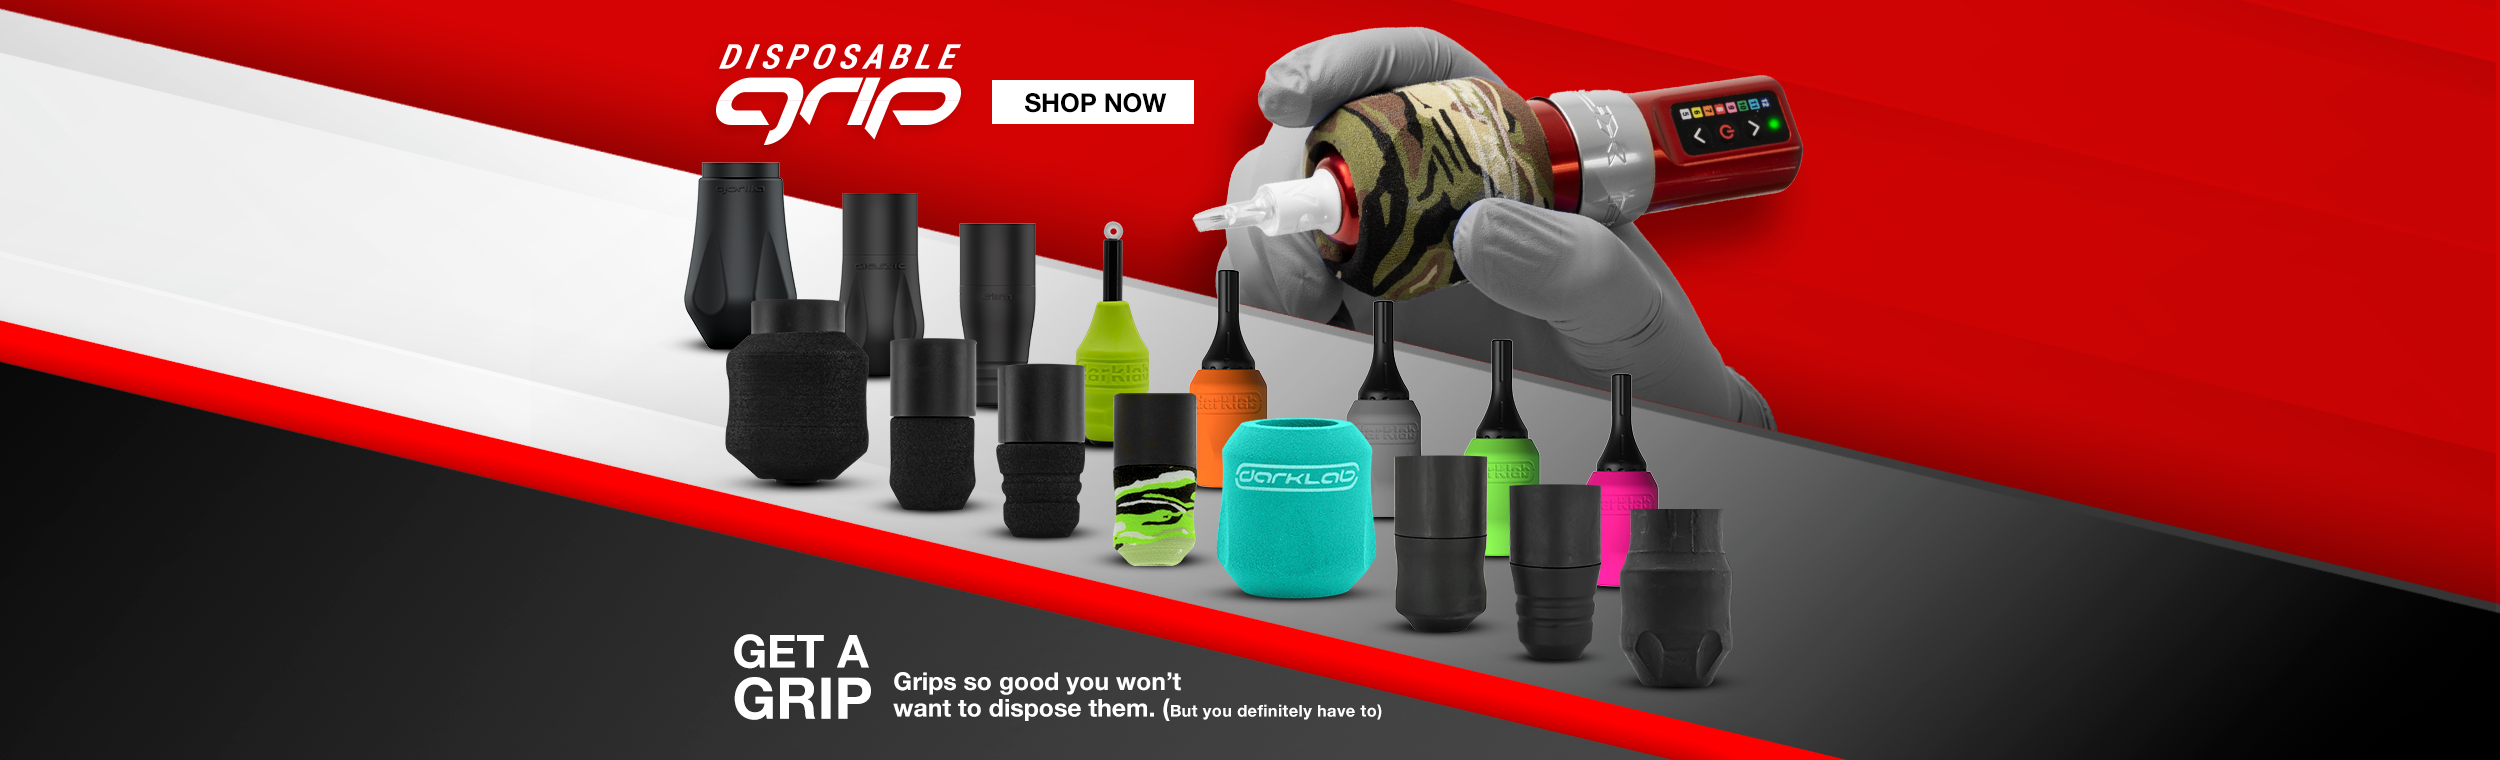 Disposable Grips